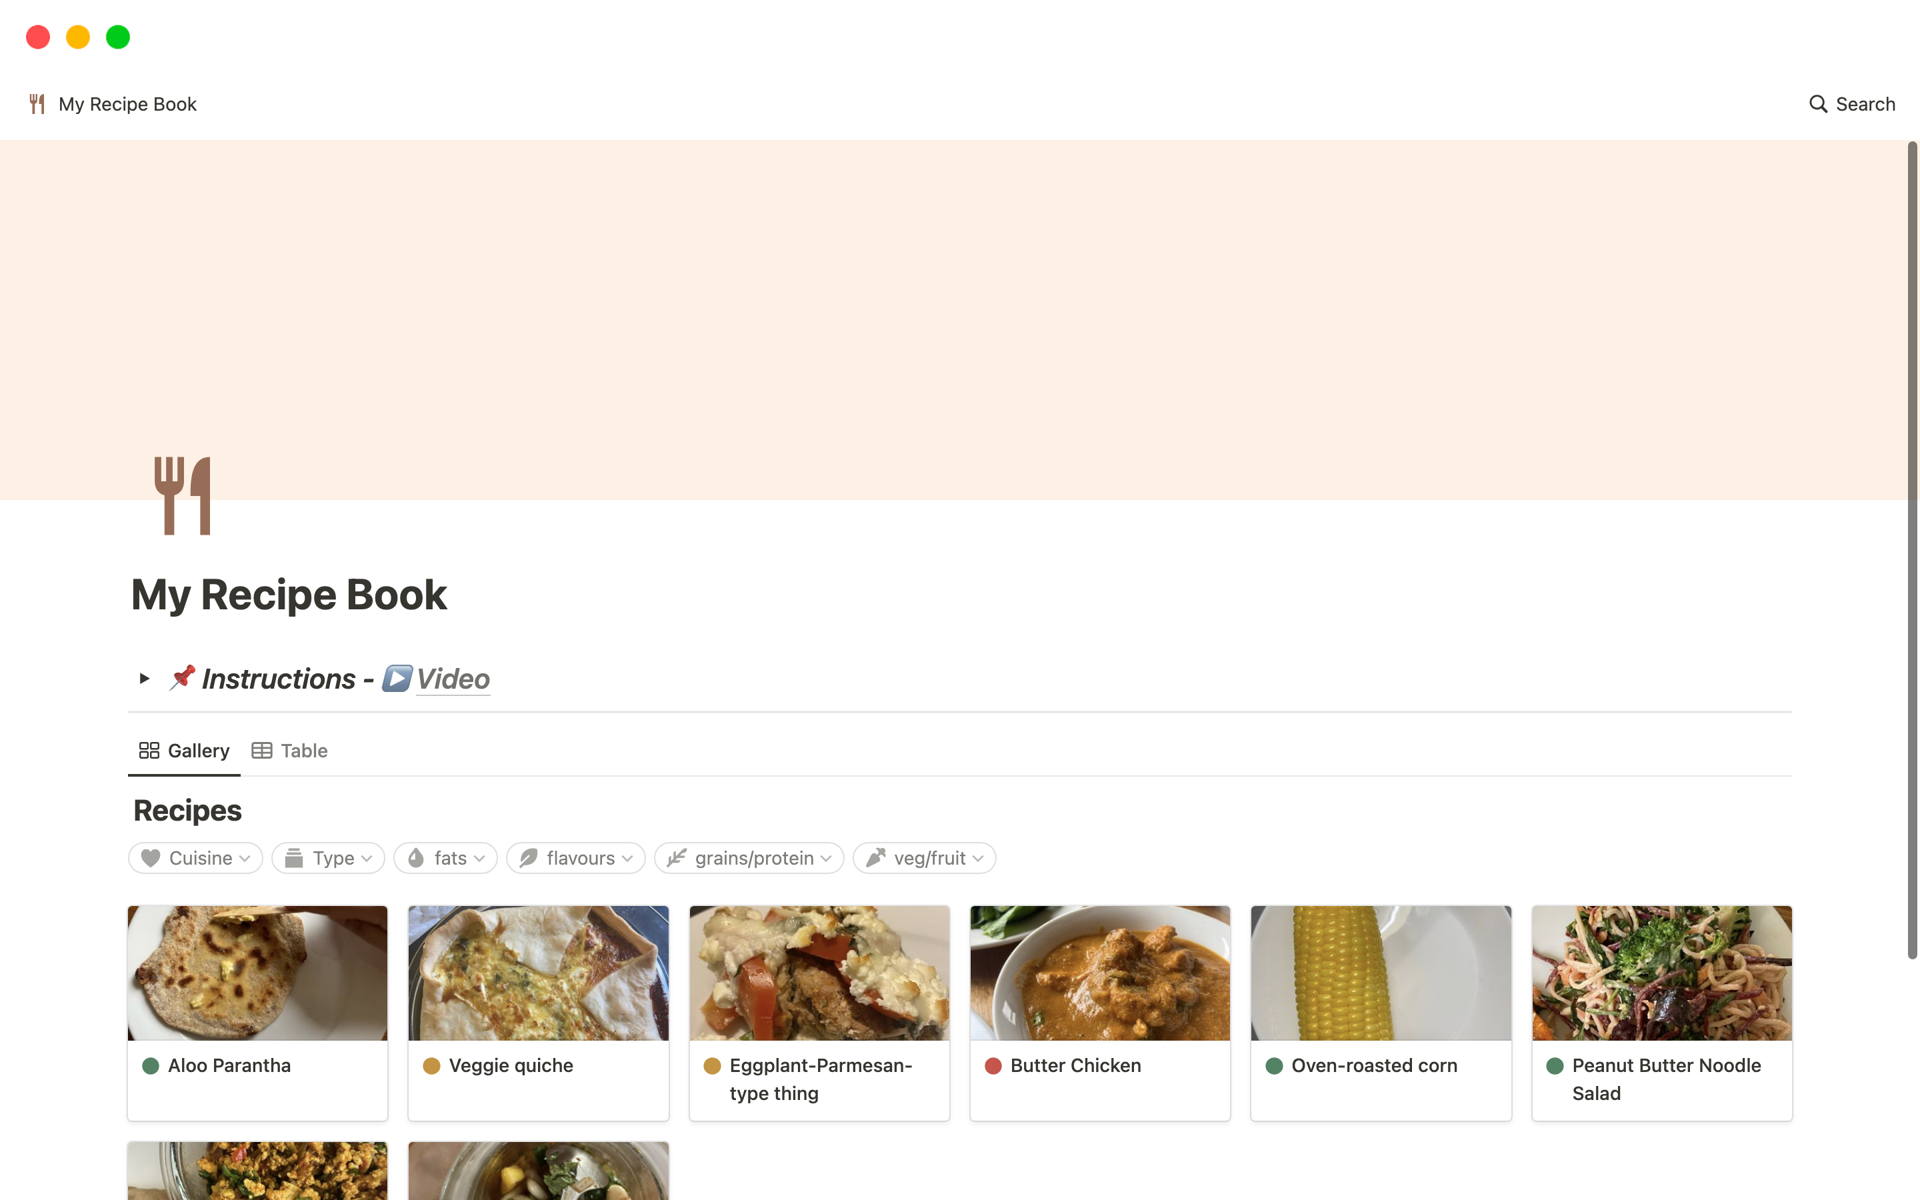 Organise and find your recipe cards through filters to help you decide what to cook!